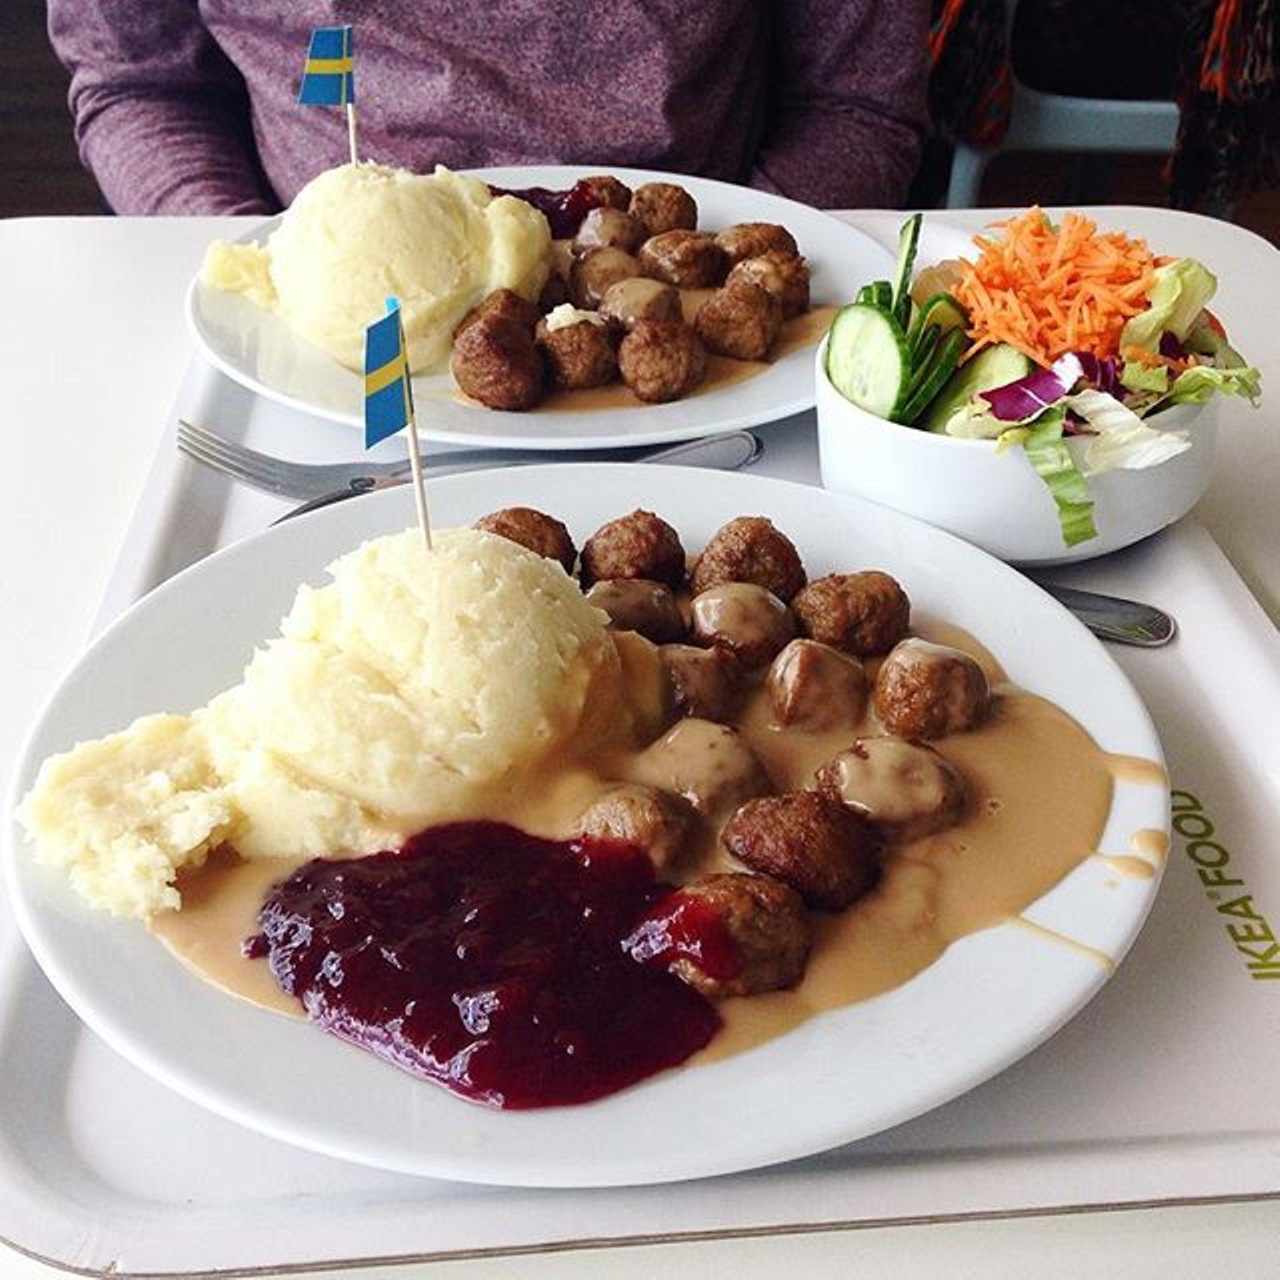 Go to IKEA
Assemble your dream home and peruse the aisles of the Swedish superstore, and when you&#146;re done, eat some meatballs. (Photo via Instagram user @_dorcsi)